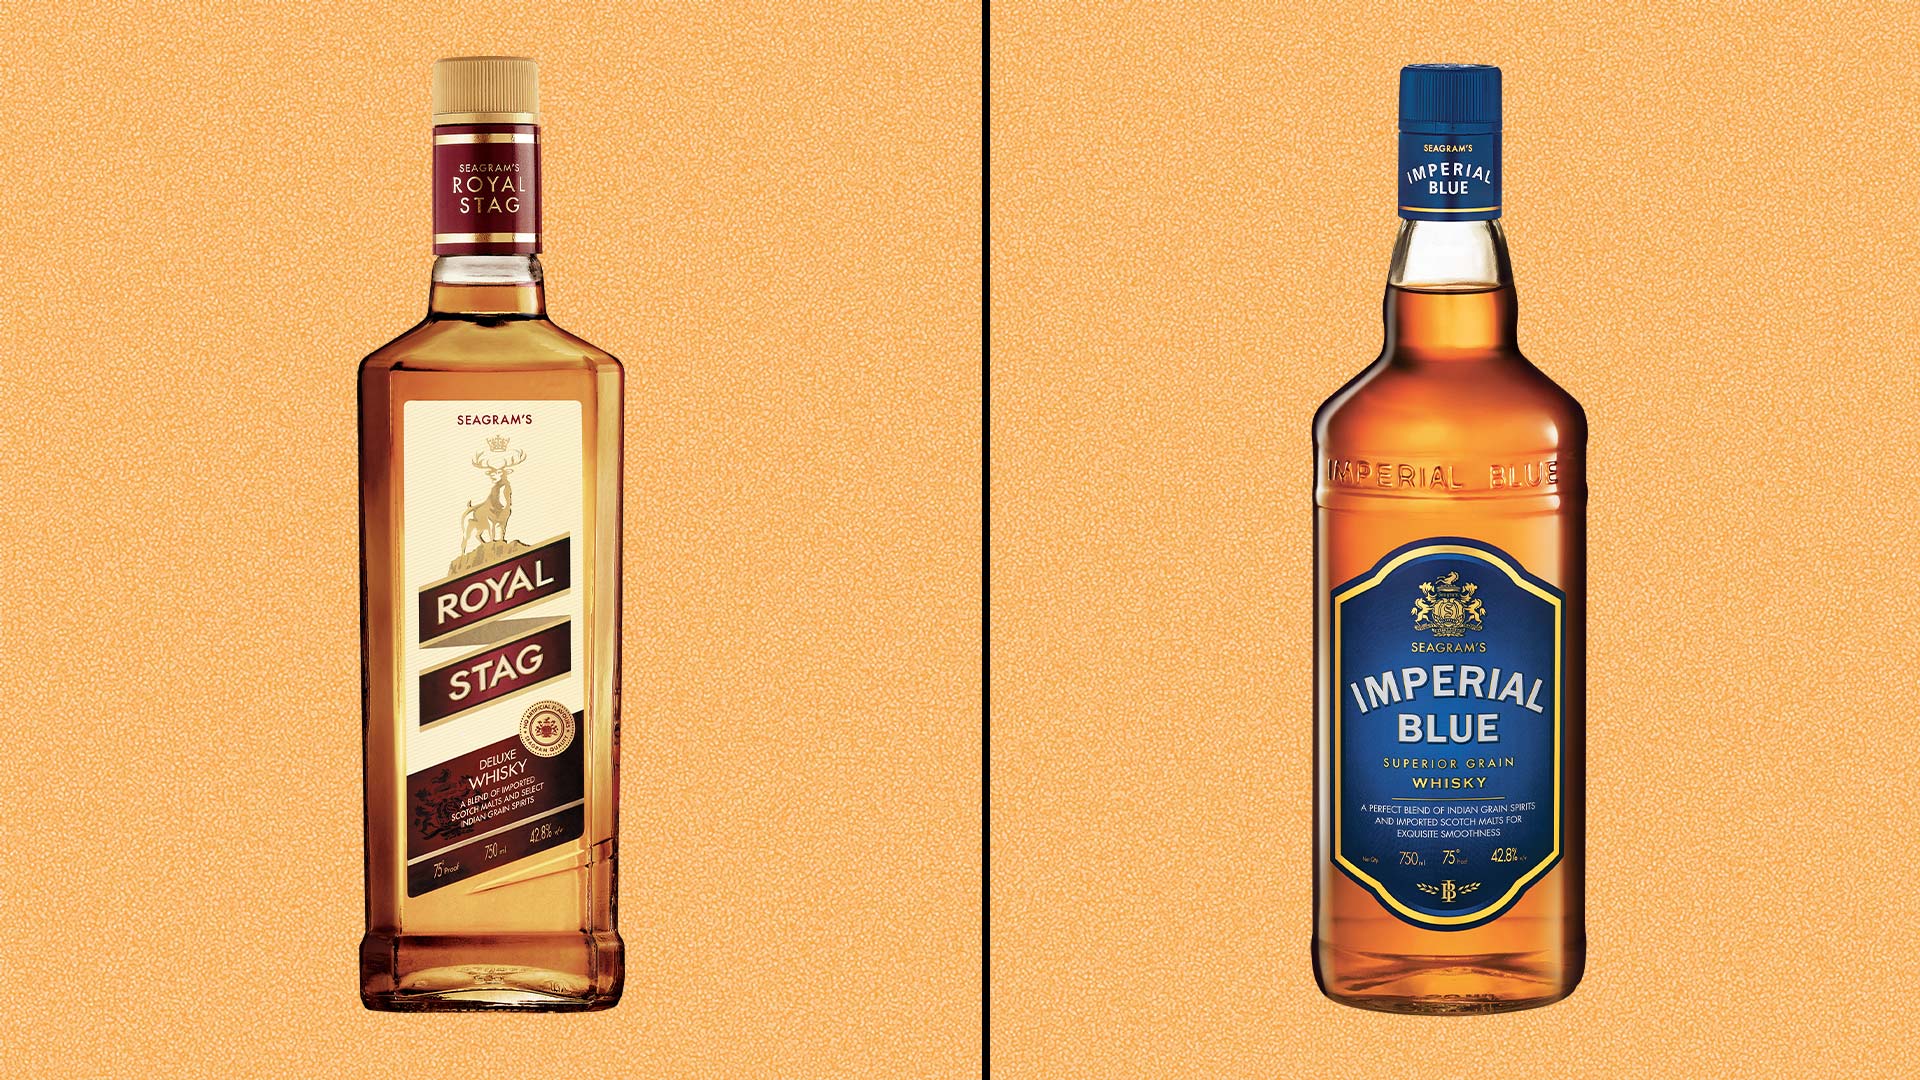 These 4 Indian Whisky Brands Are Among The Best Selling Spirits In The World